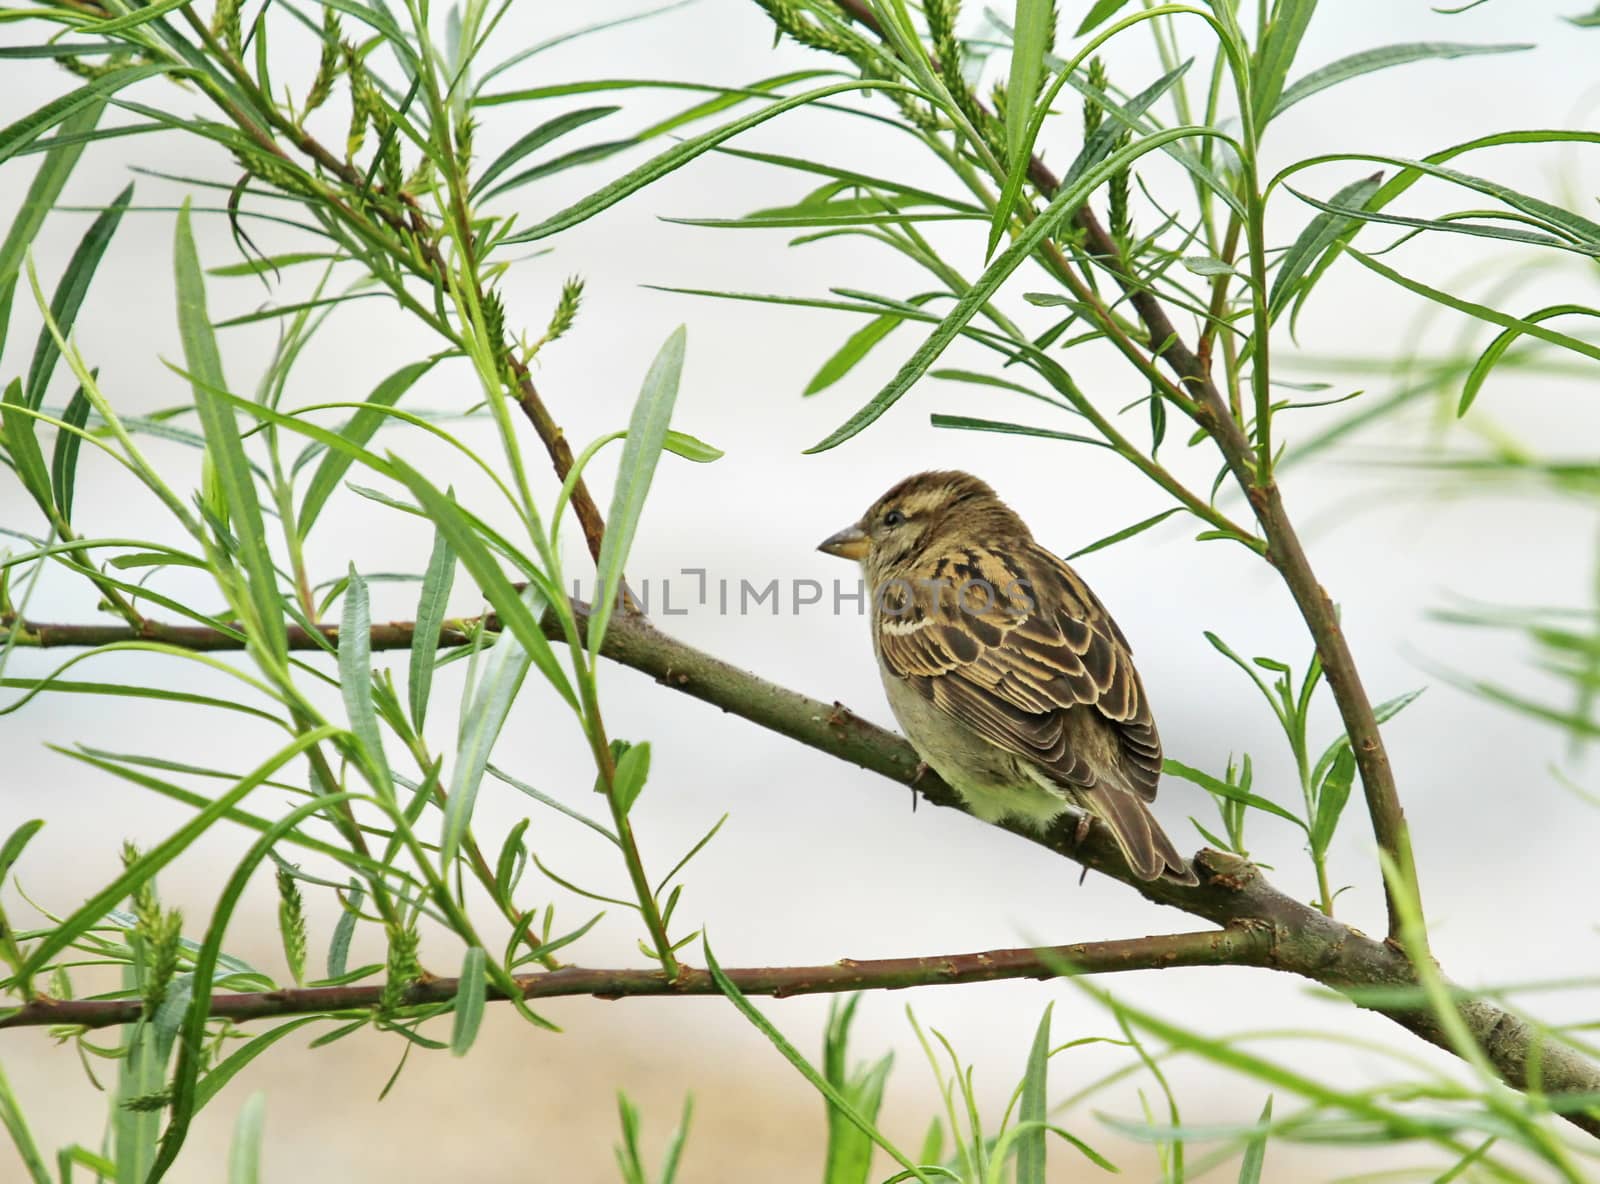 Small sparrow standing on a branch with little green leaves